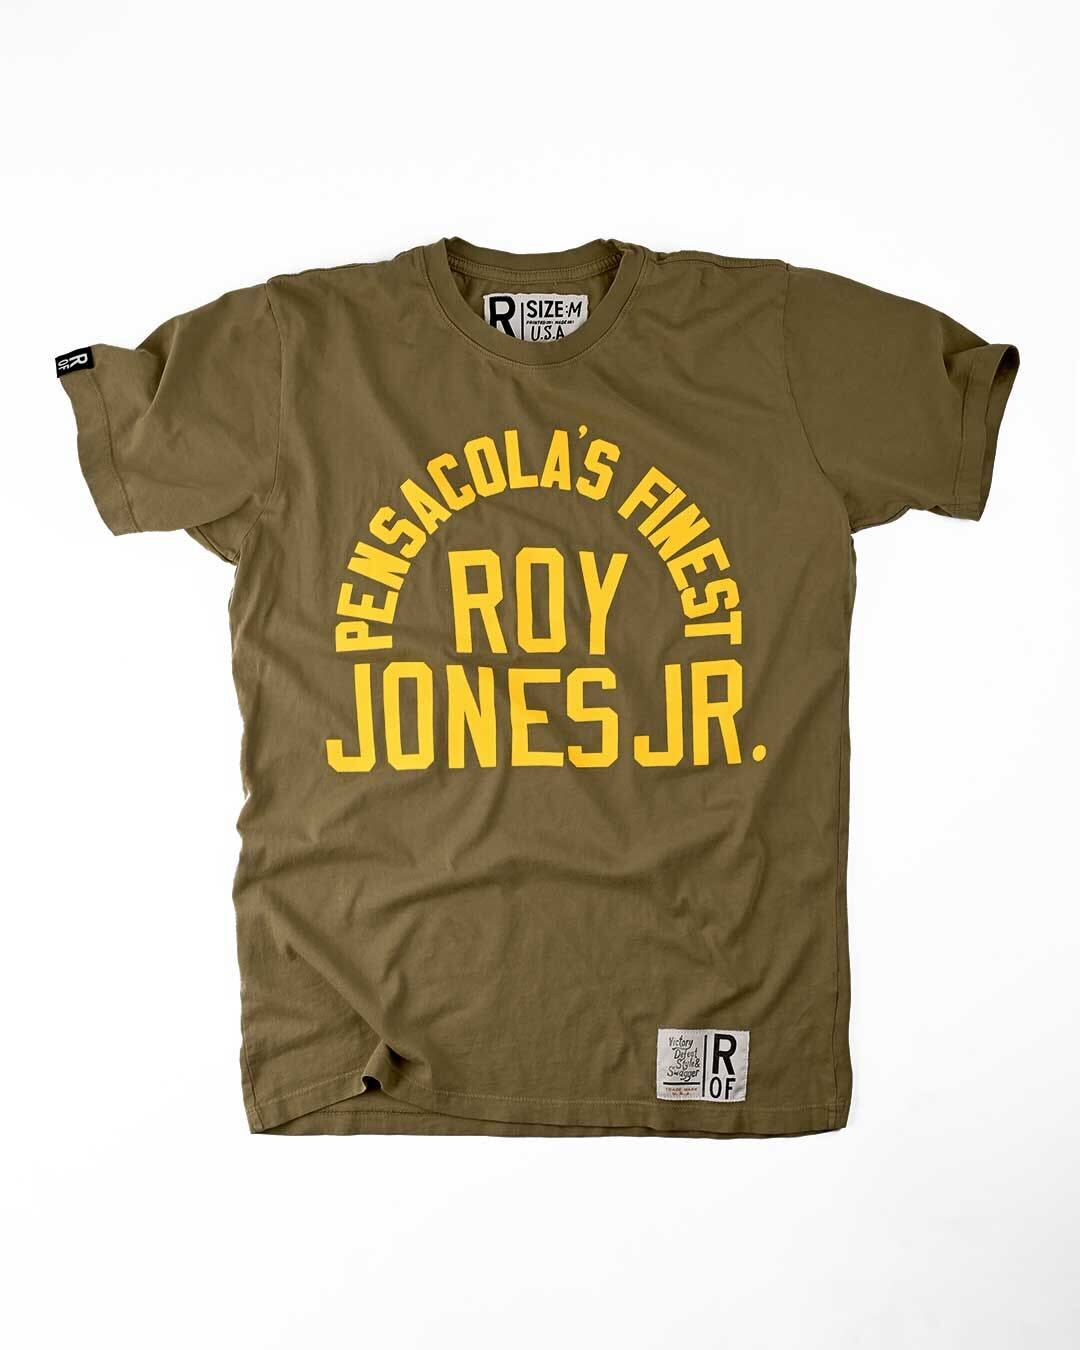 Roy Jones Jr. Pensacola's Finest Olive Tee - Roots of Fight Canada